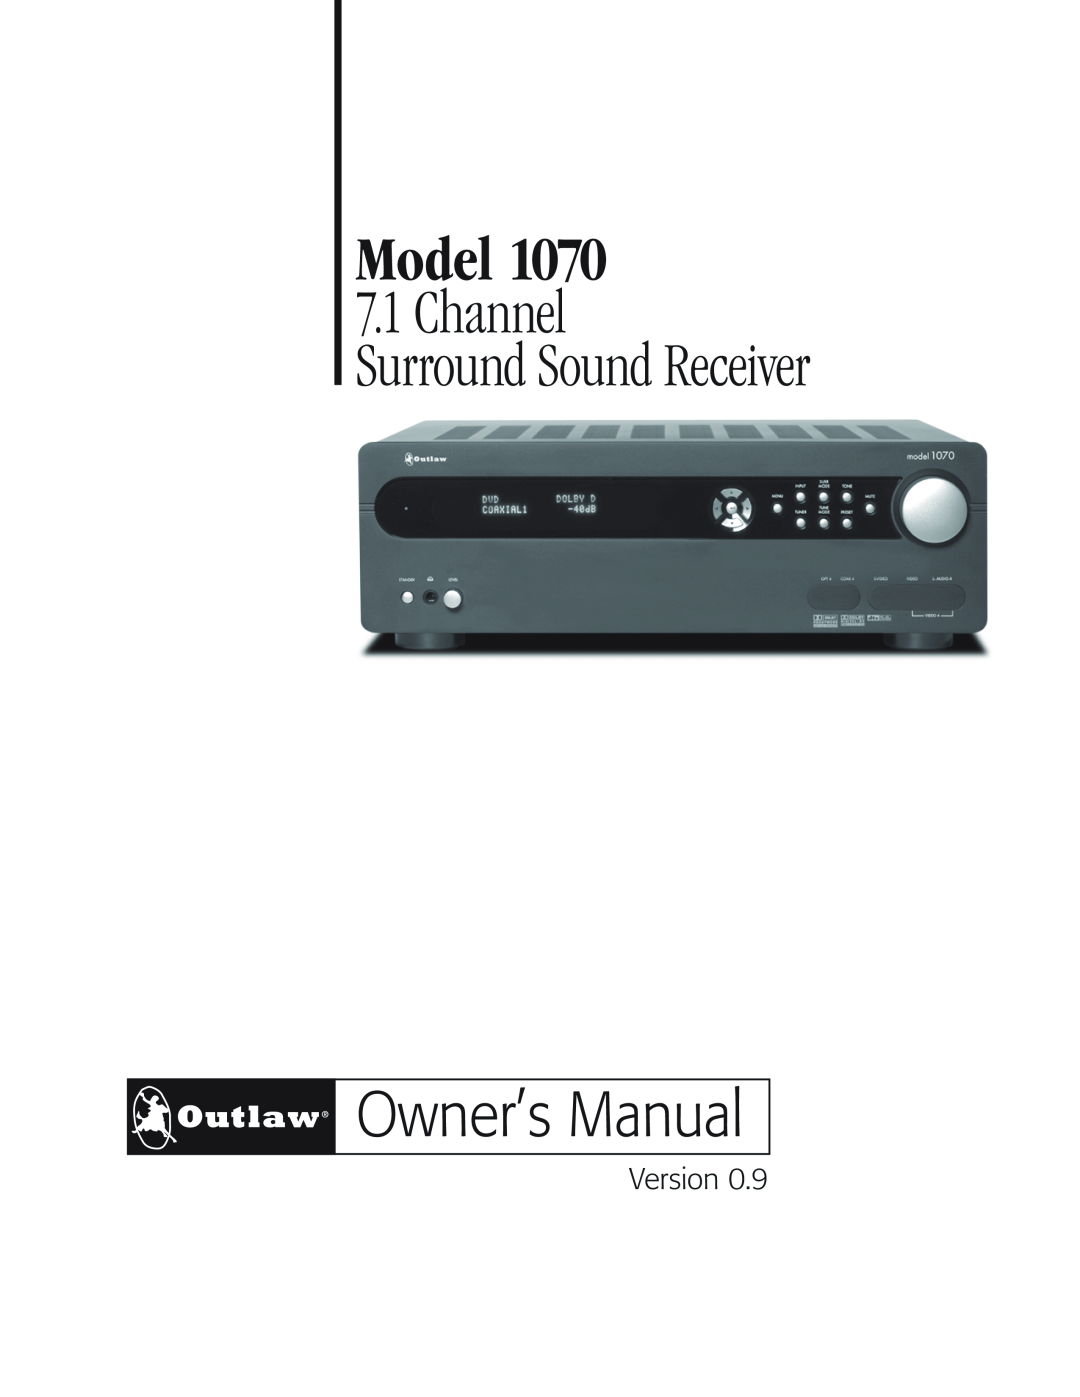 Outlaw Audio 1070 owner manual Model, Channel Surround Sound Receiver, Version 